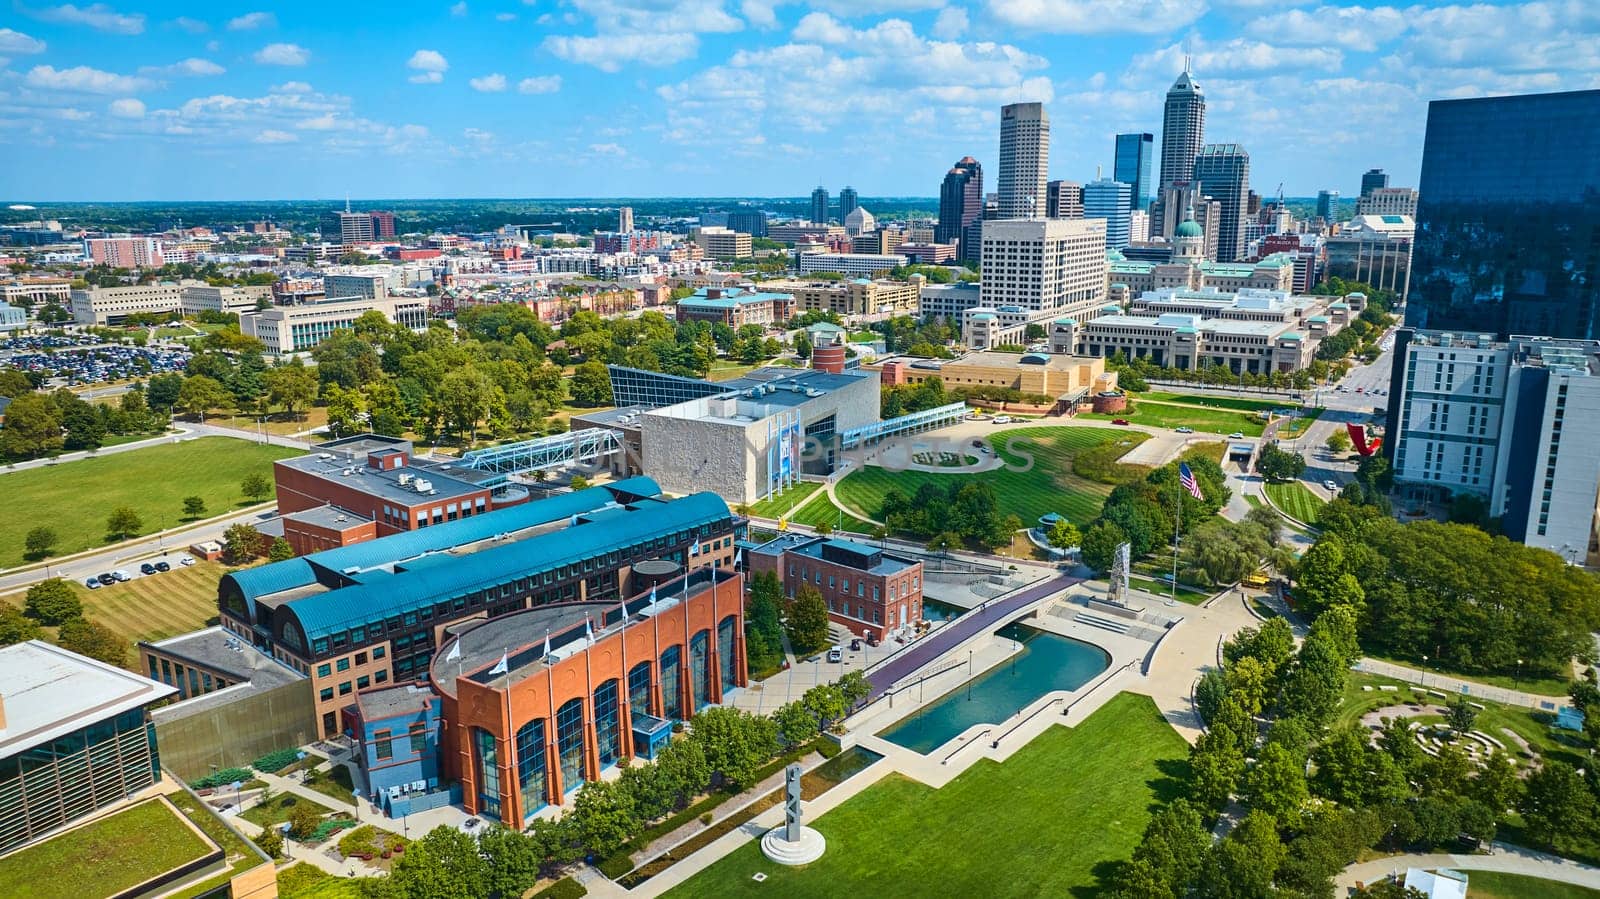 Vibrant aerial view of modern Indianapolis cityscape, featuring diverse architectural styles, green urban park, and a bustling river canal captured by a drone in 2023